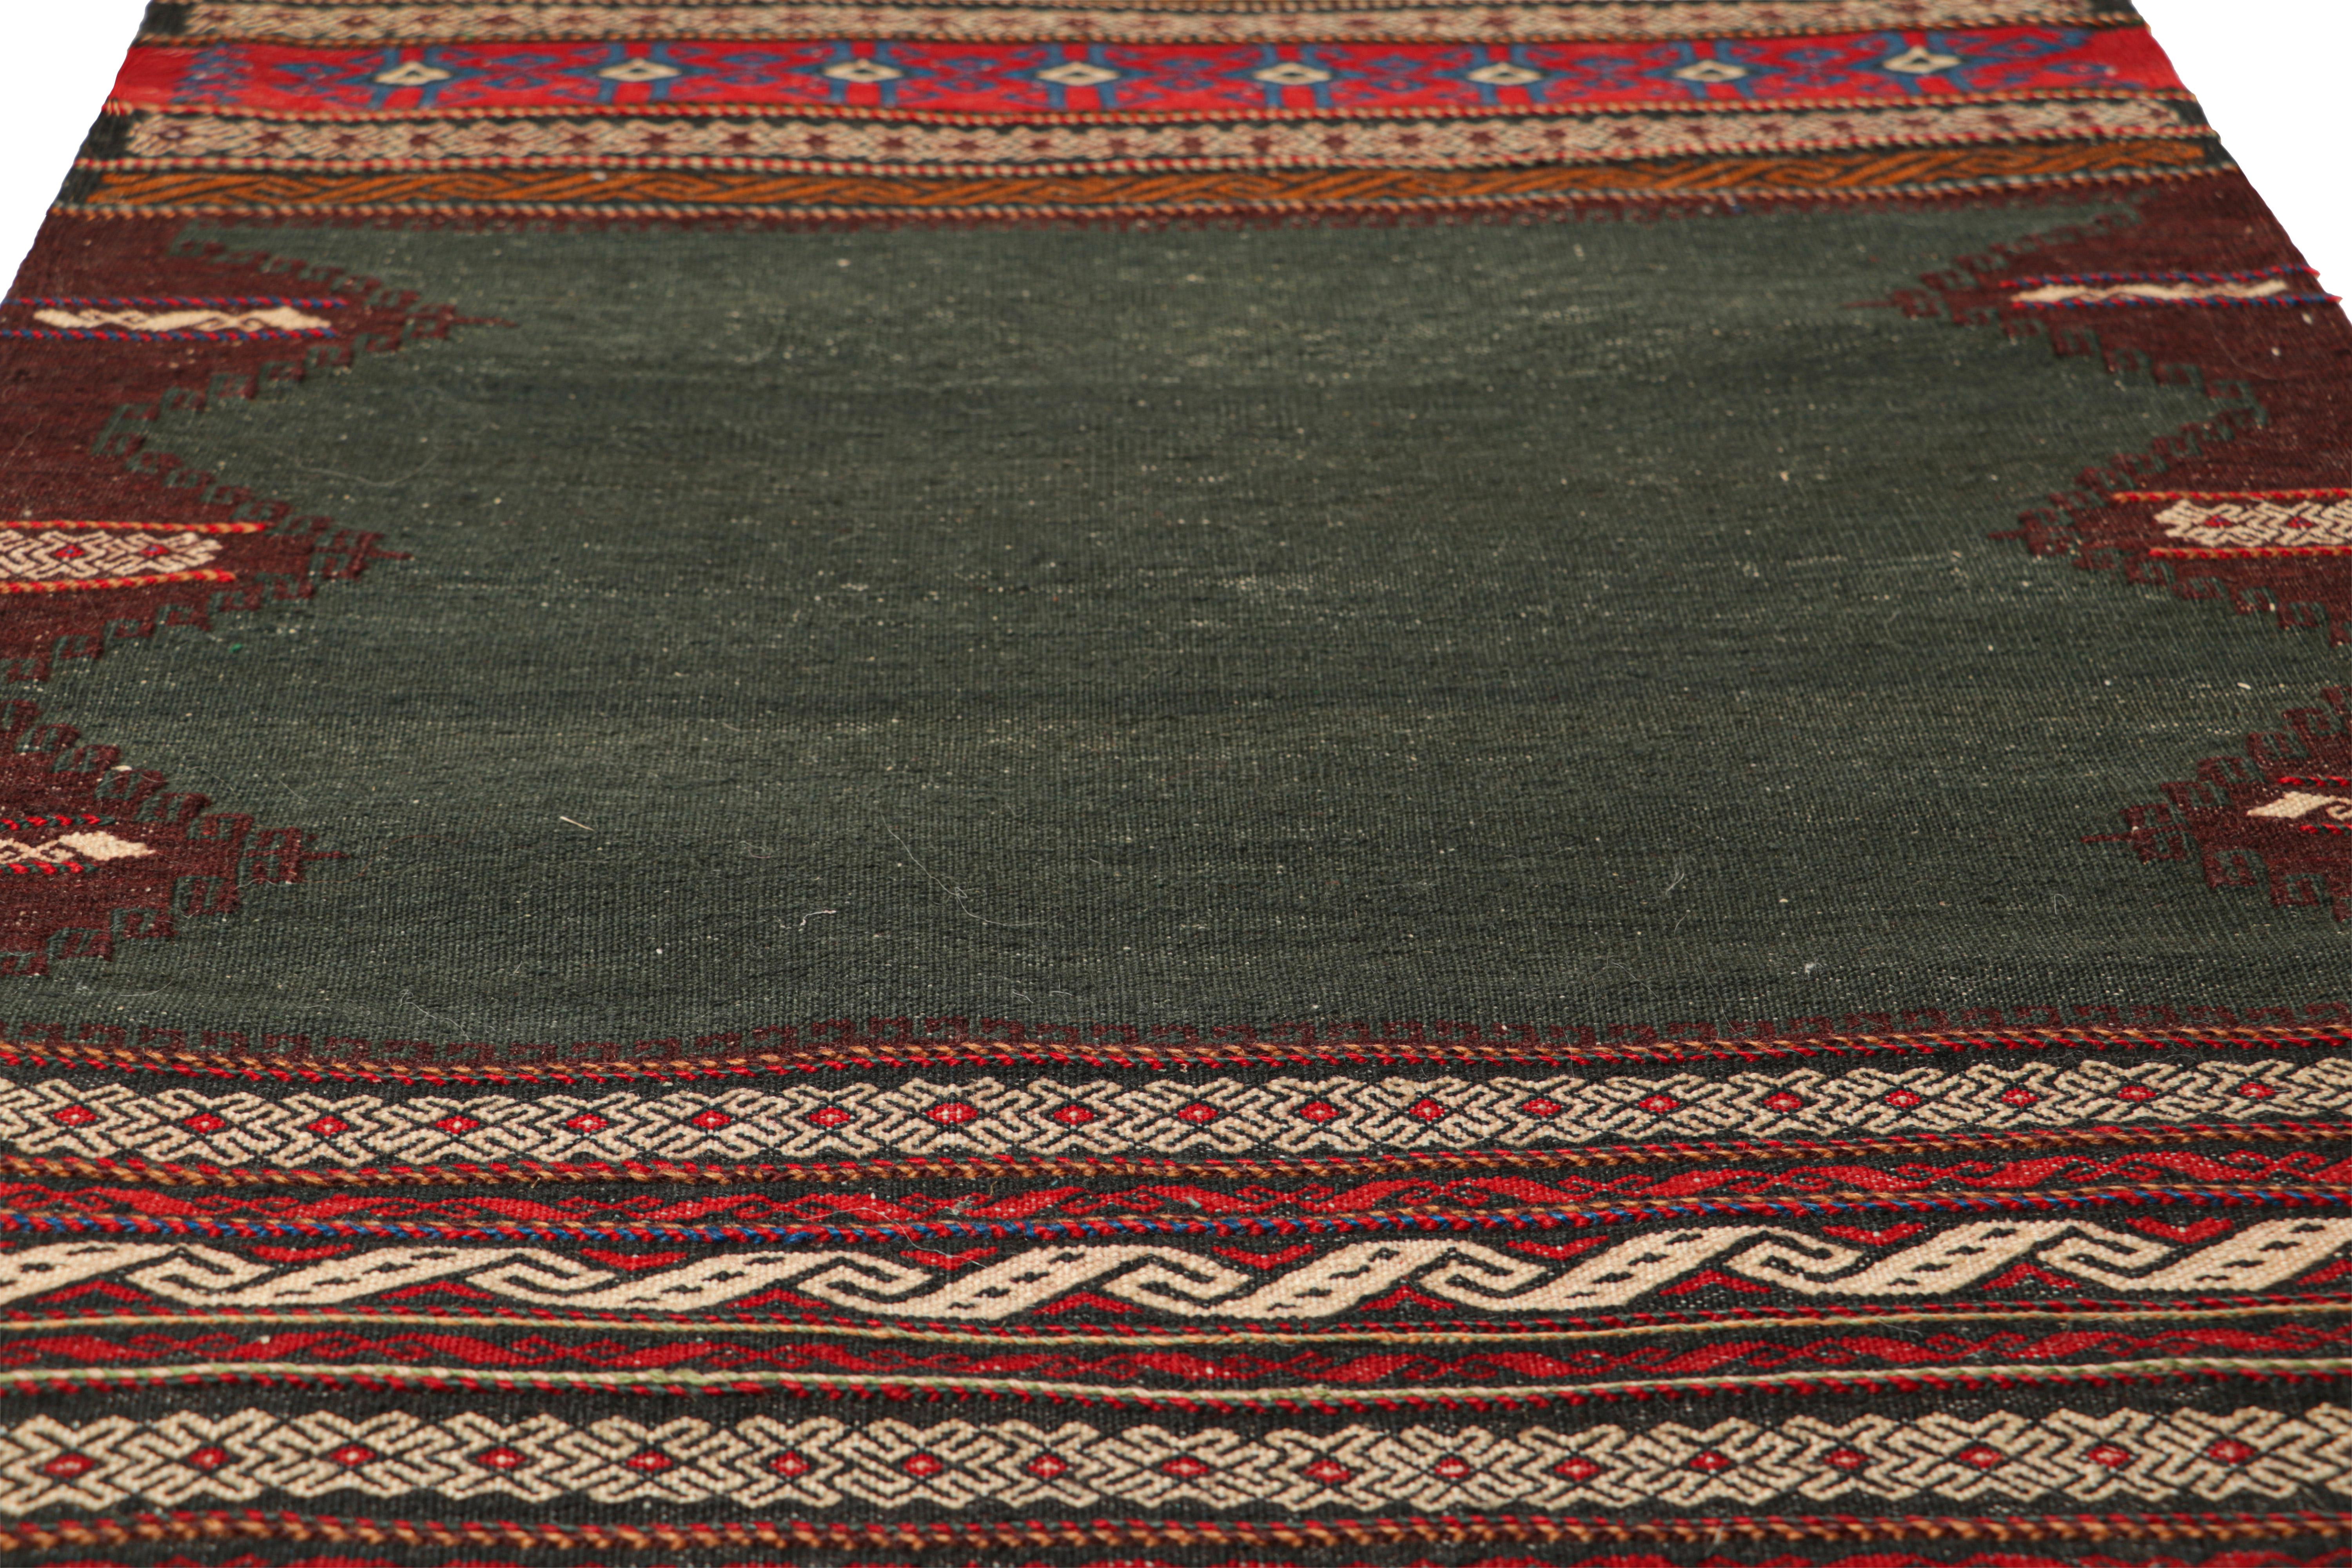 Hand-Woven Vintage Afghan Kilim in Gray with Geometric Patterns, from Rug & Kilim